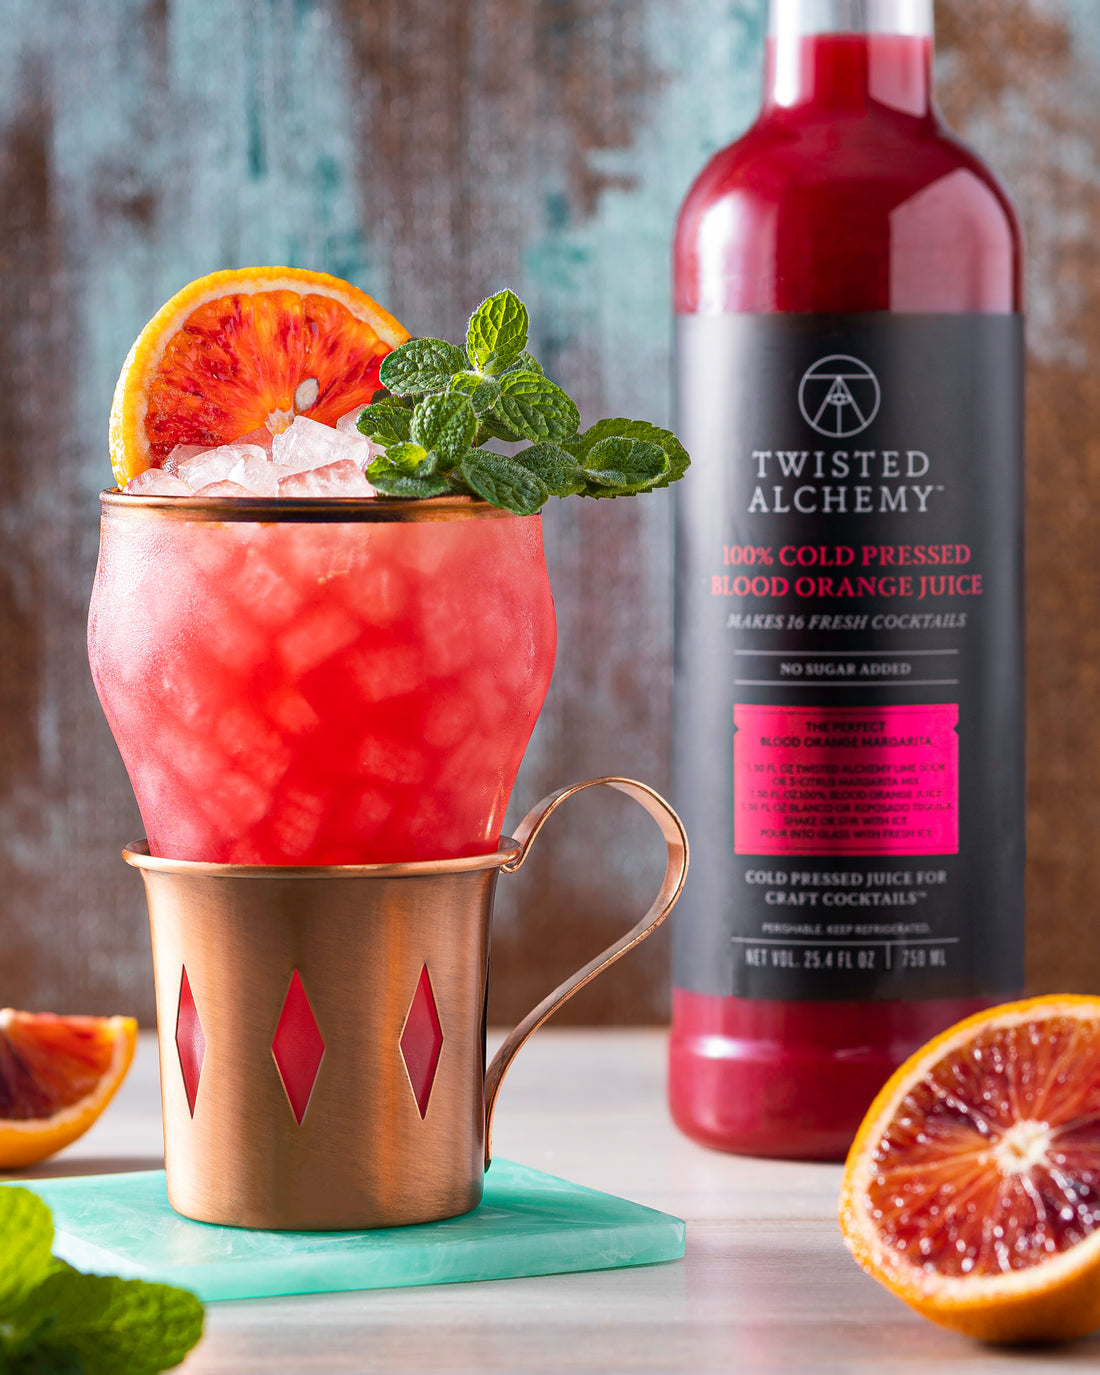 A cocktail in a copper mug next to a bottle of Twisted Alchemy blood orange juice